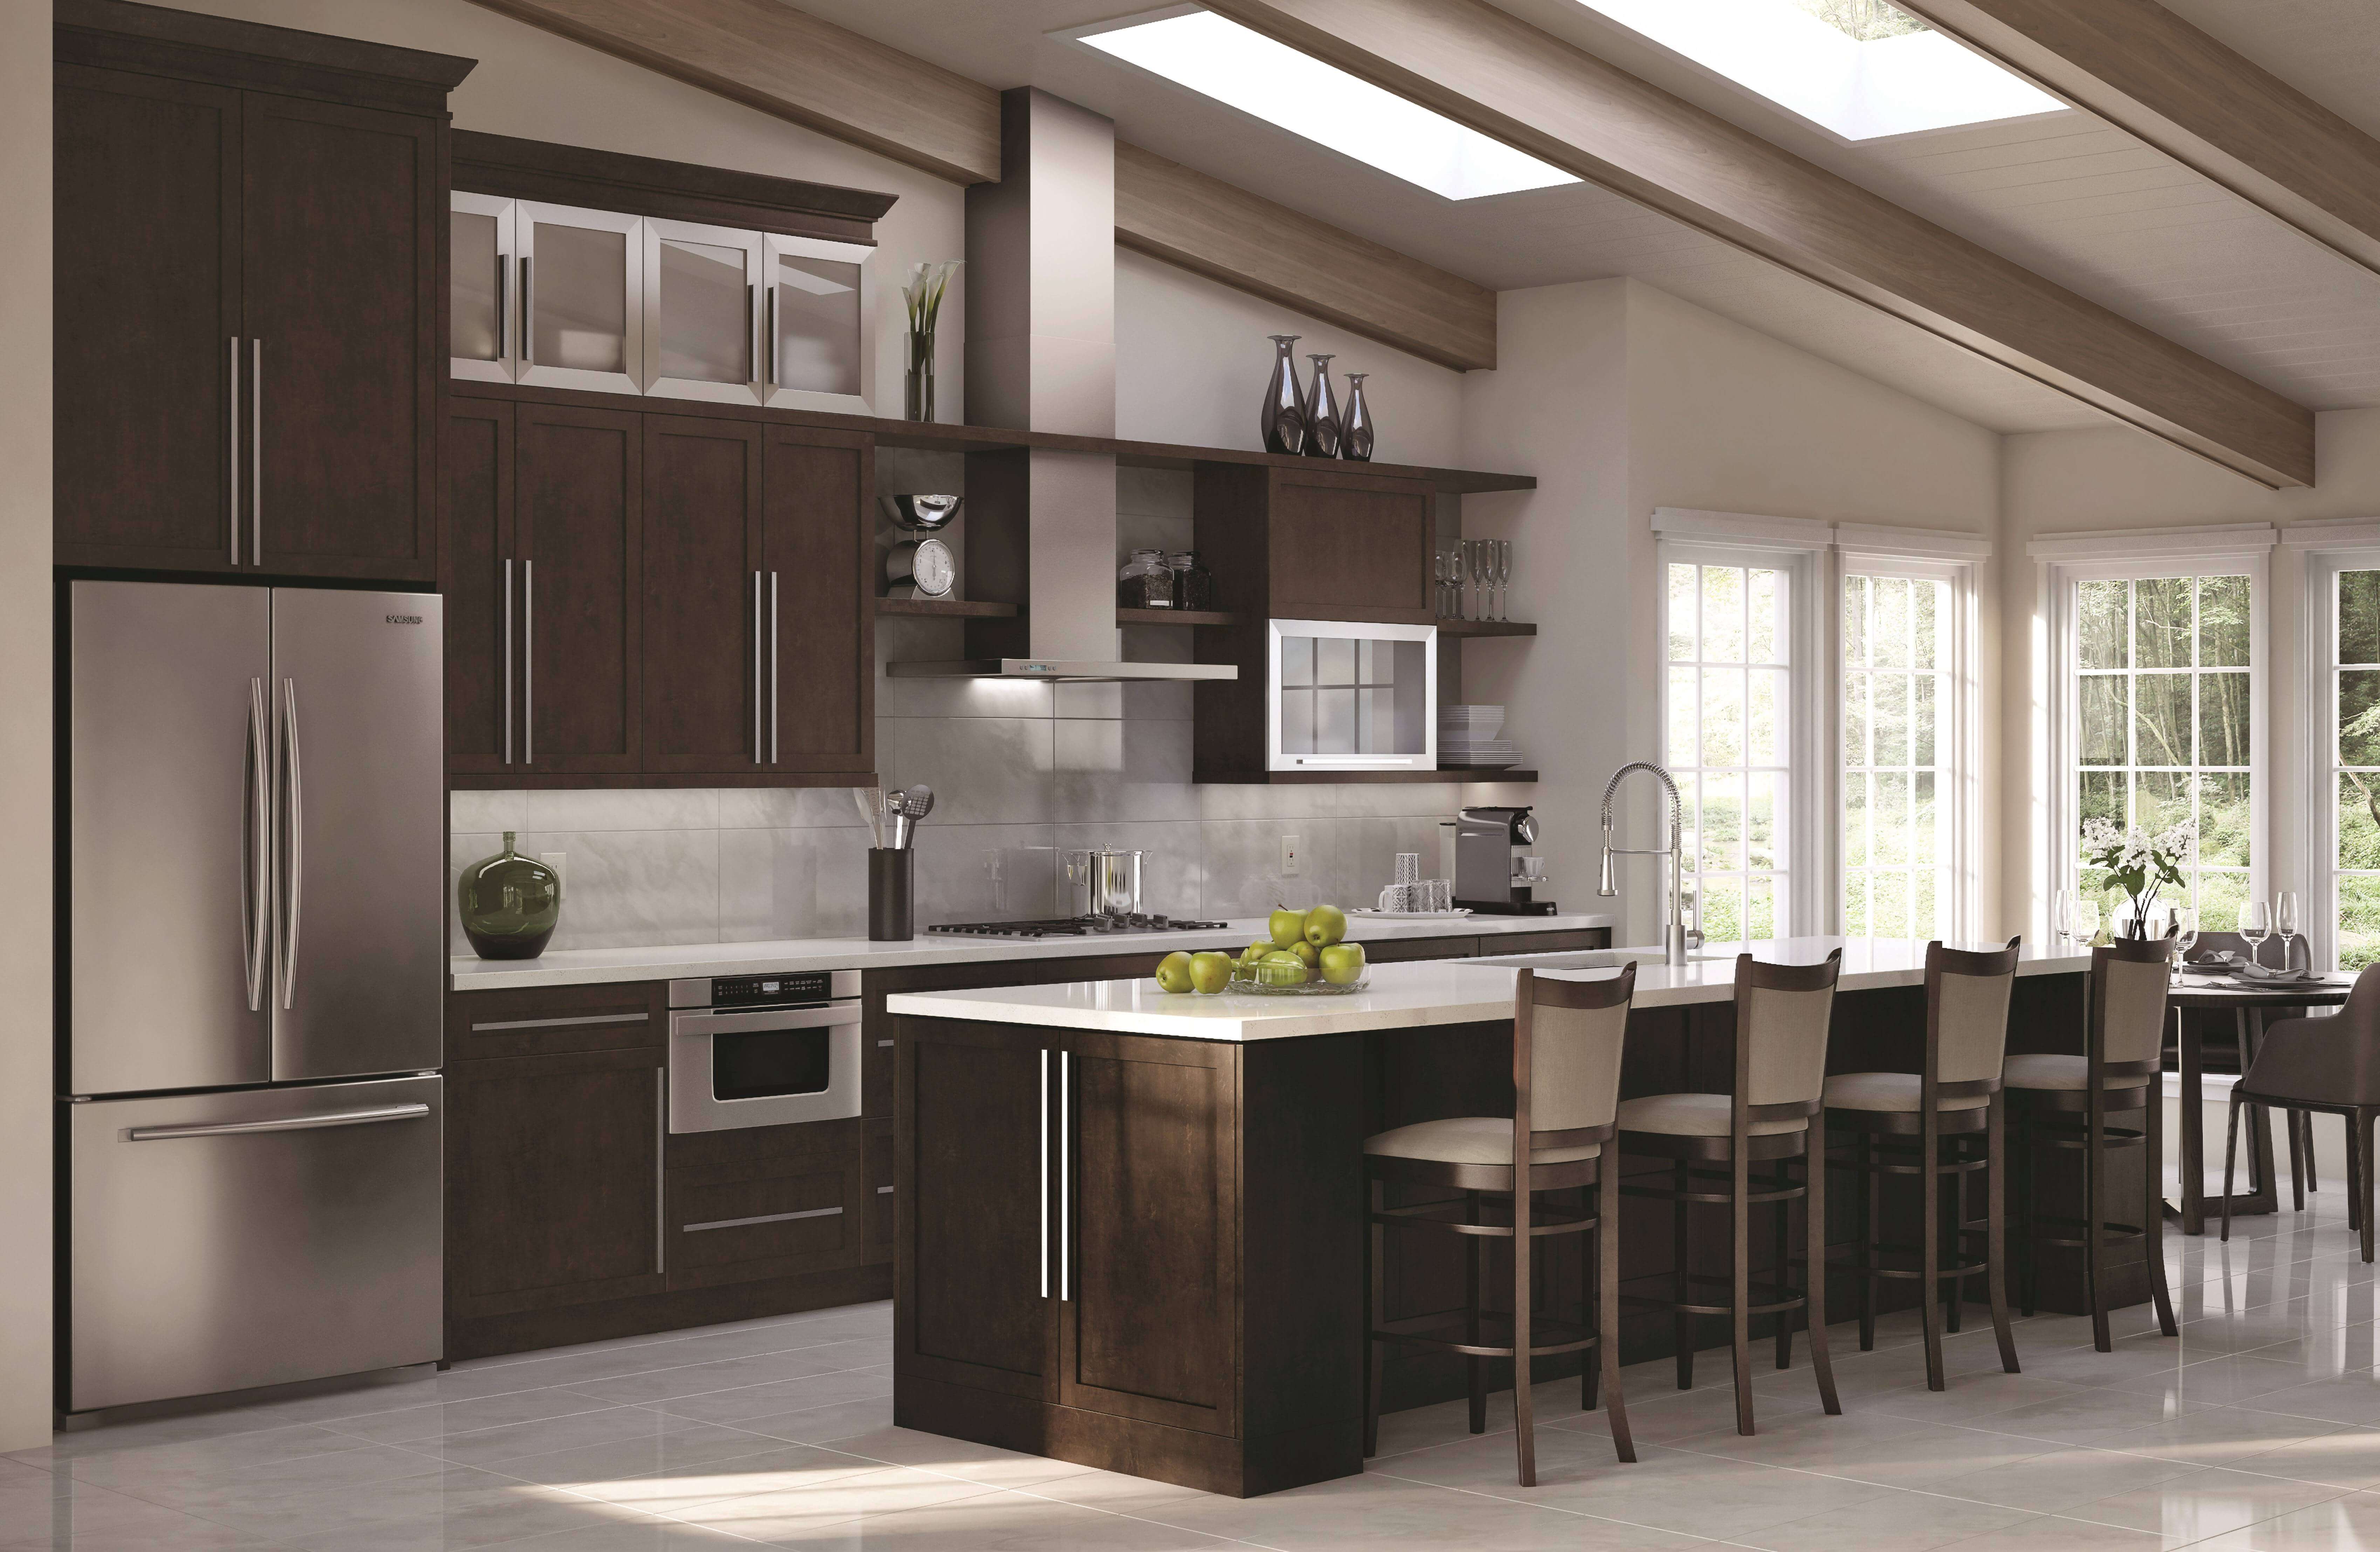 Pennsylvania Online Kitchen Cabinets come in a variety of colors